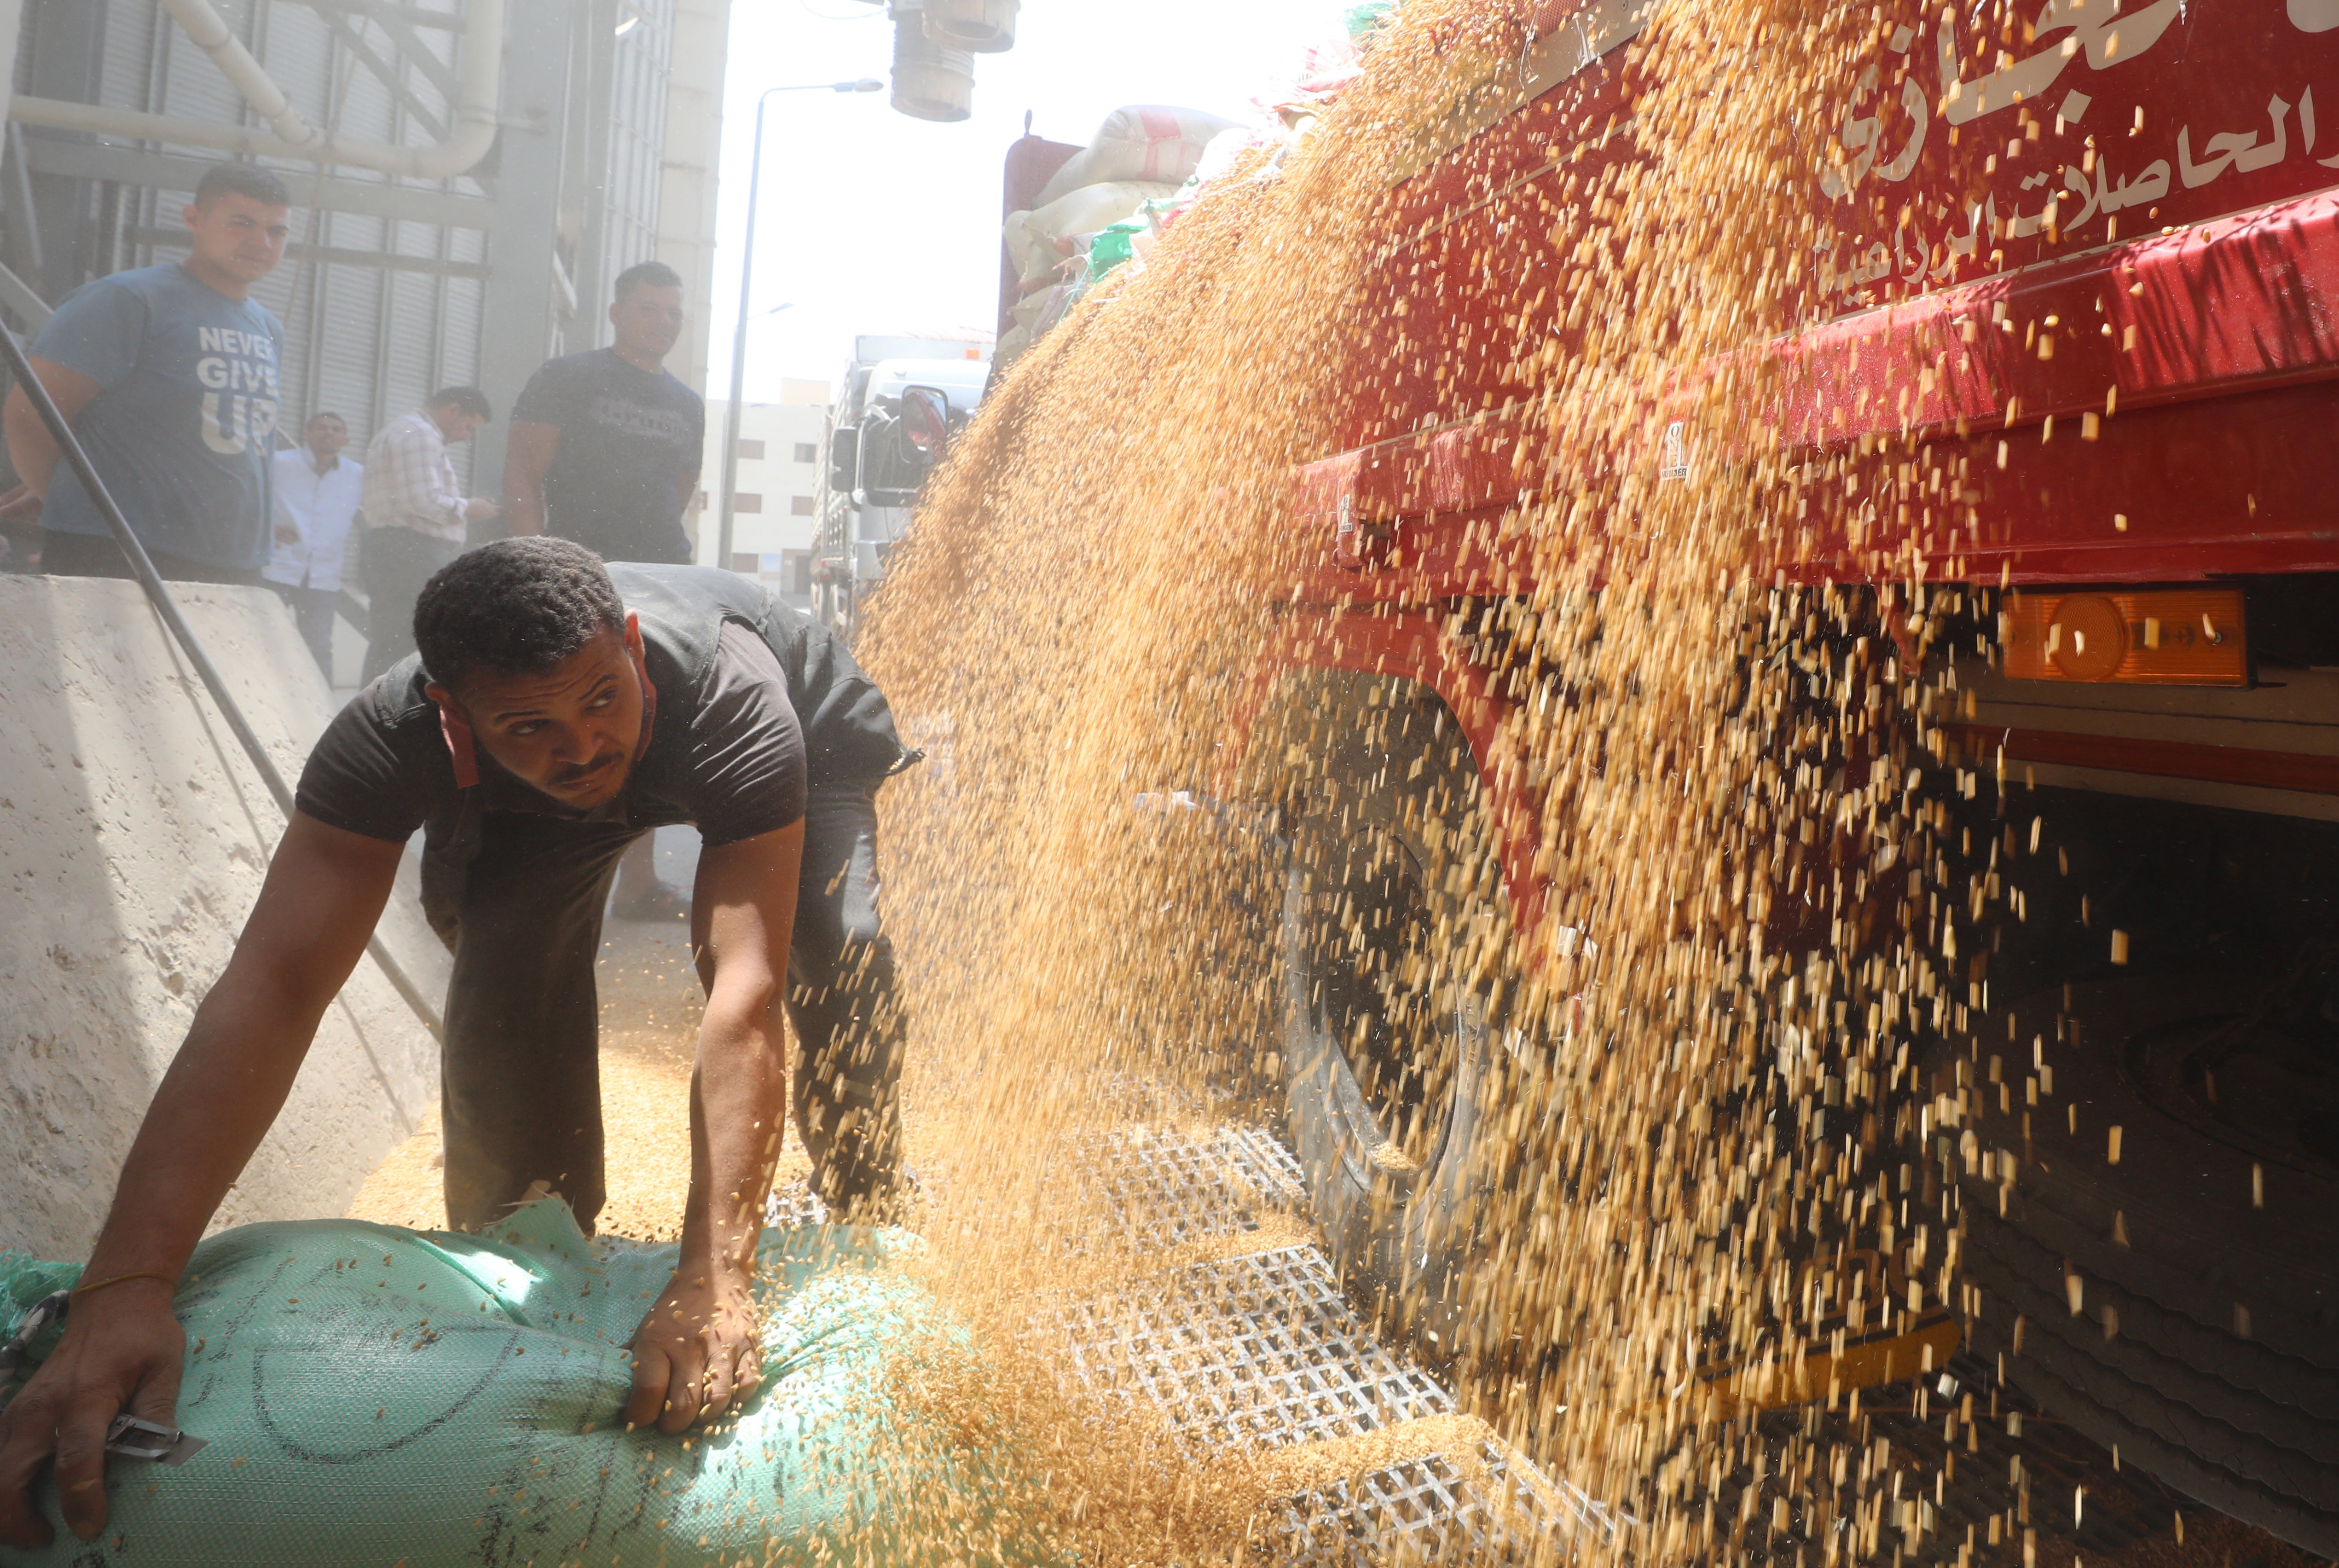 Workers unload wheat at grain silos in Egypt. Egypt is the largest importer of wheat in the world and has been forced by the war in Ukraine to radically change its strategy and now relies on the local harvest